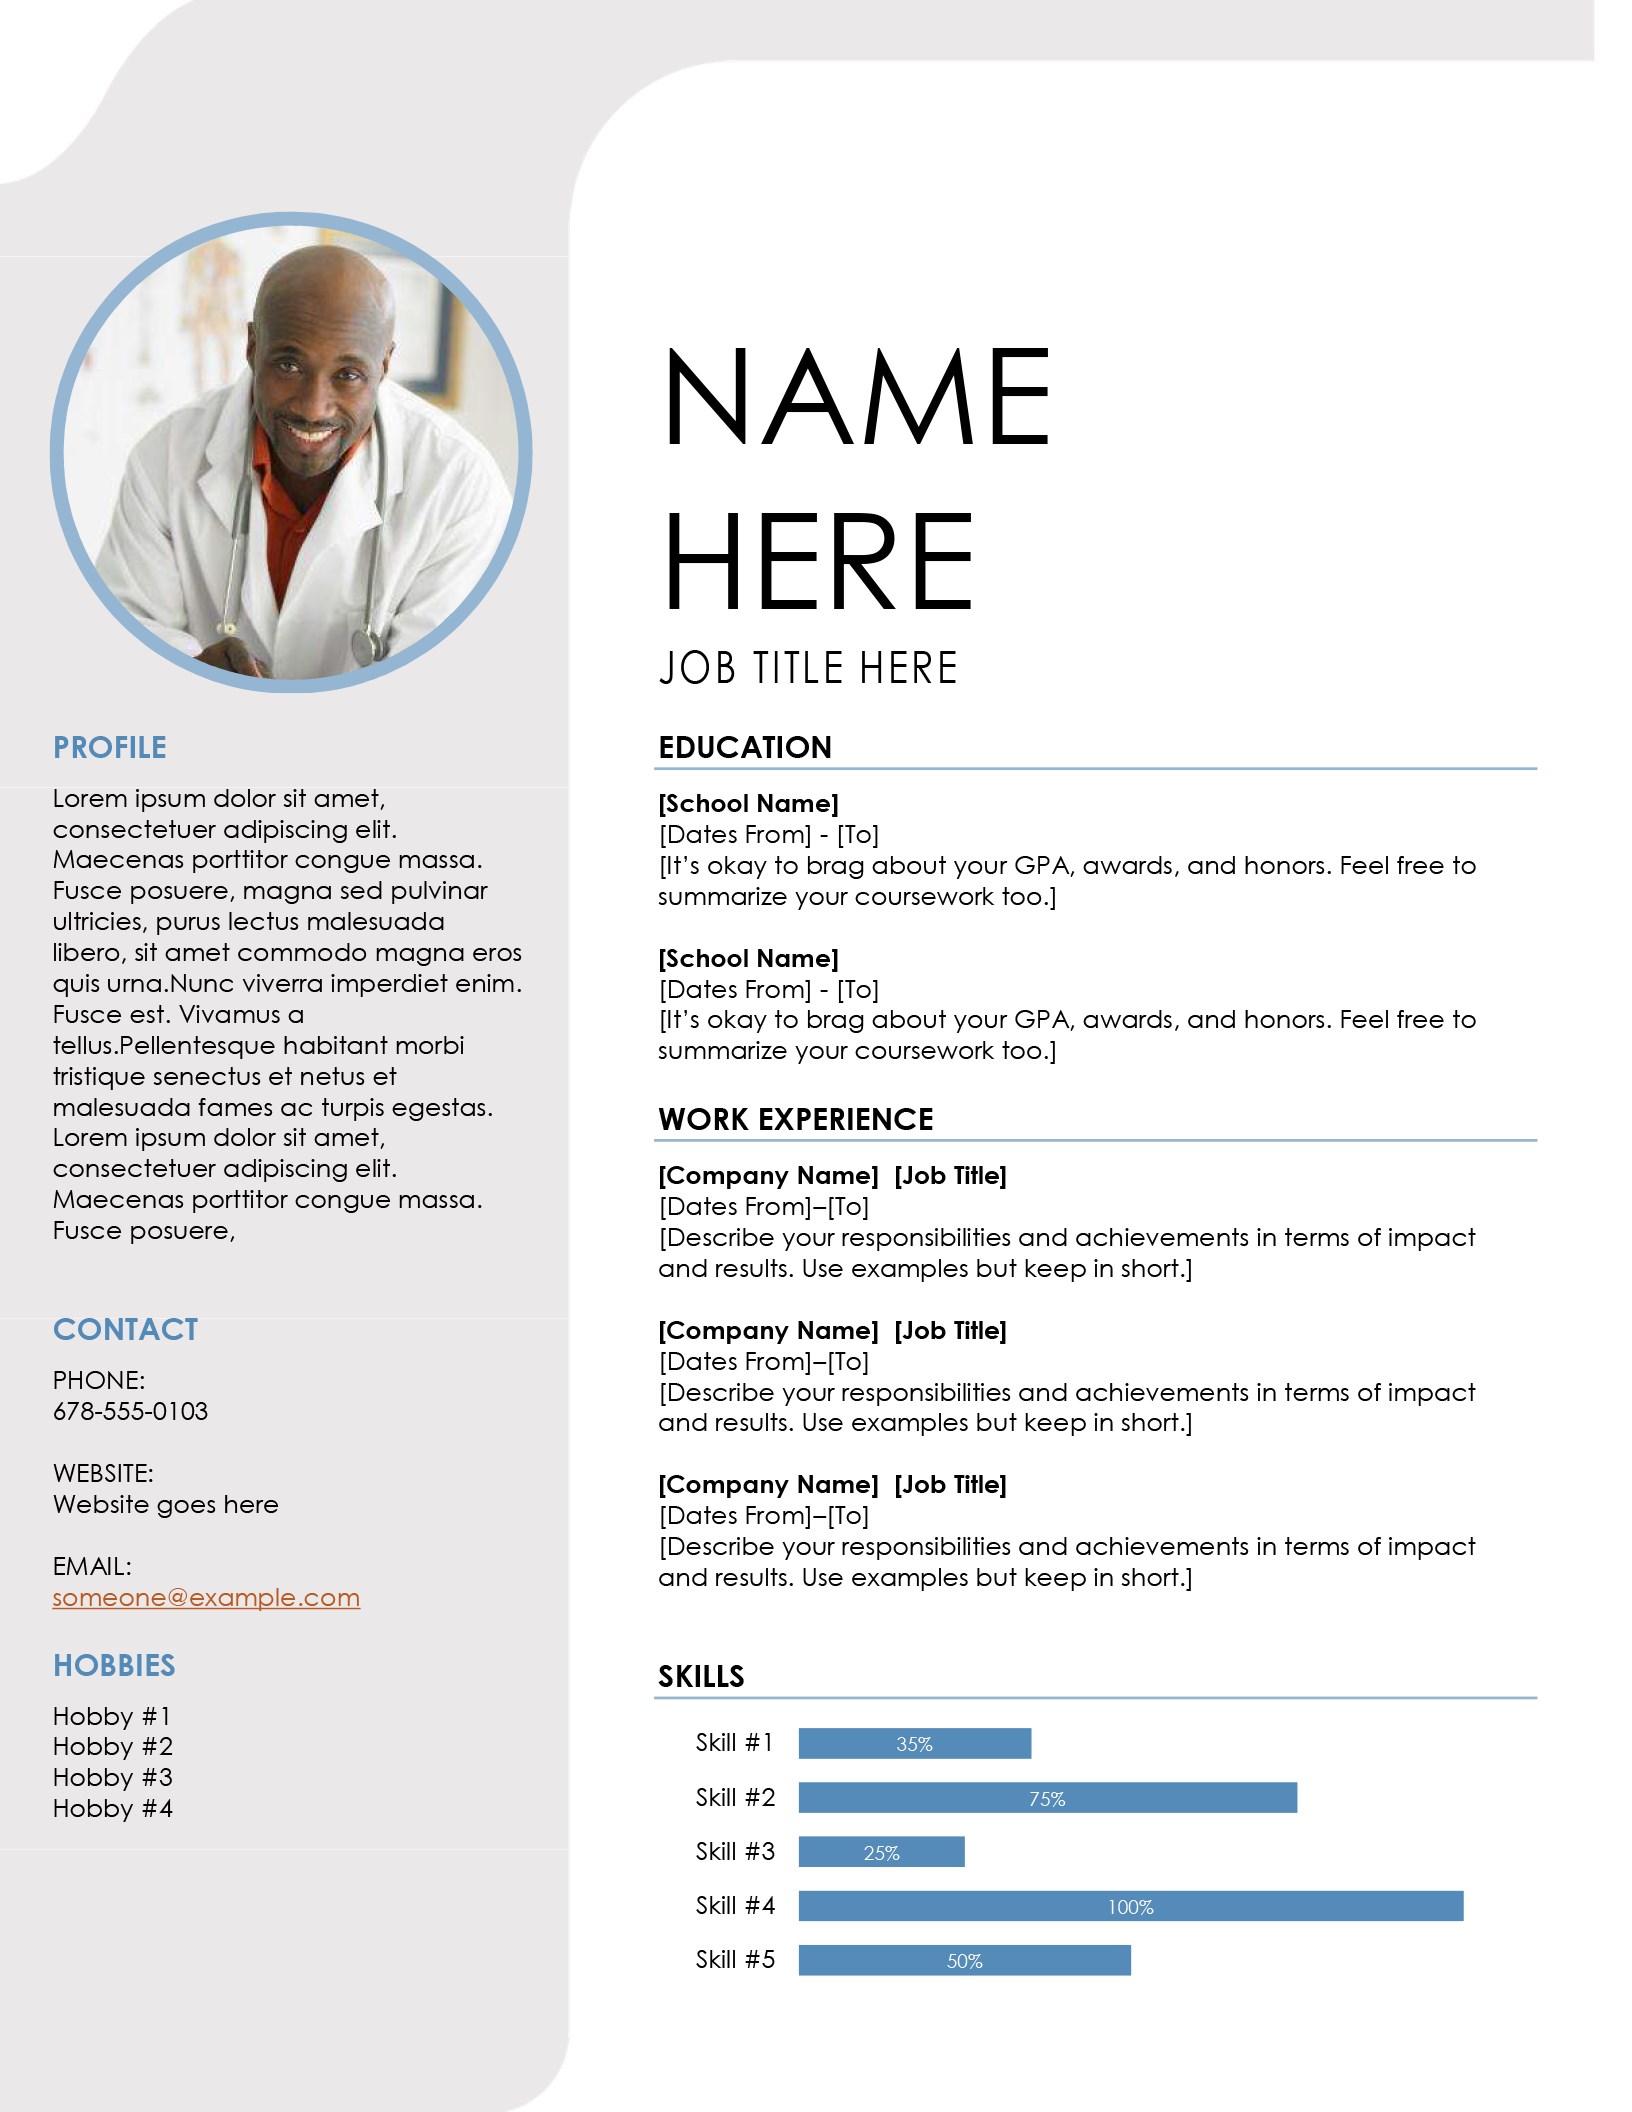 Resume Template Word Resumes And Cover Letters Office Com Job Resume Template Microsoft Word Templates resume template word|wikiresume.com